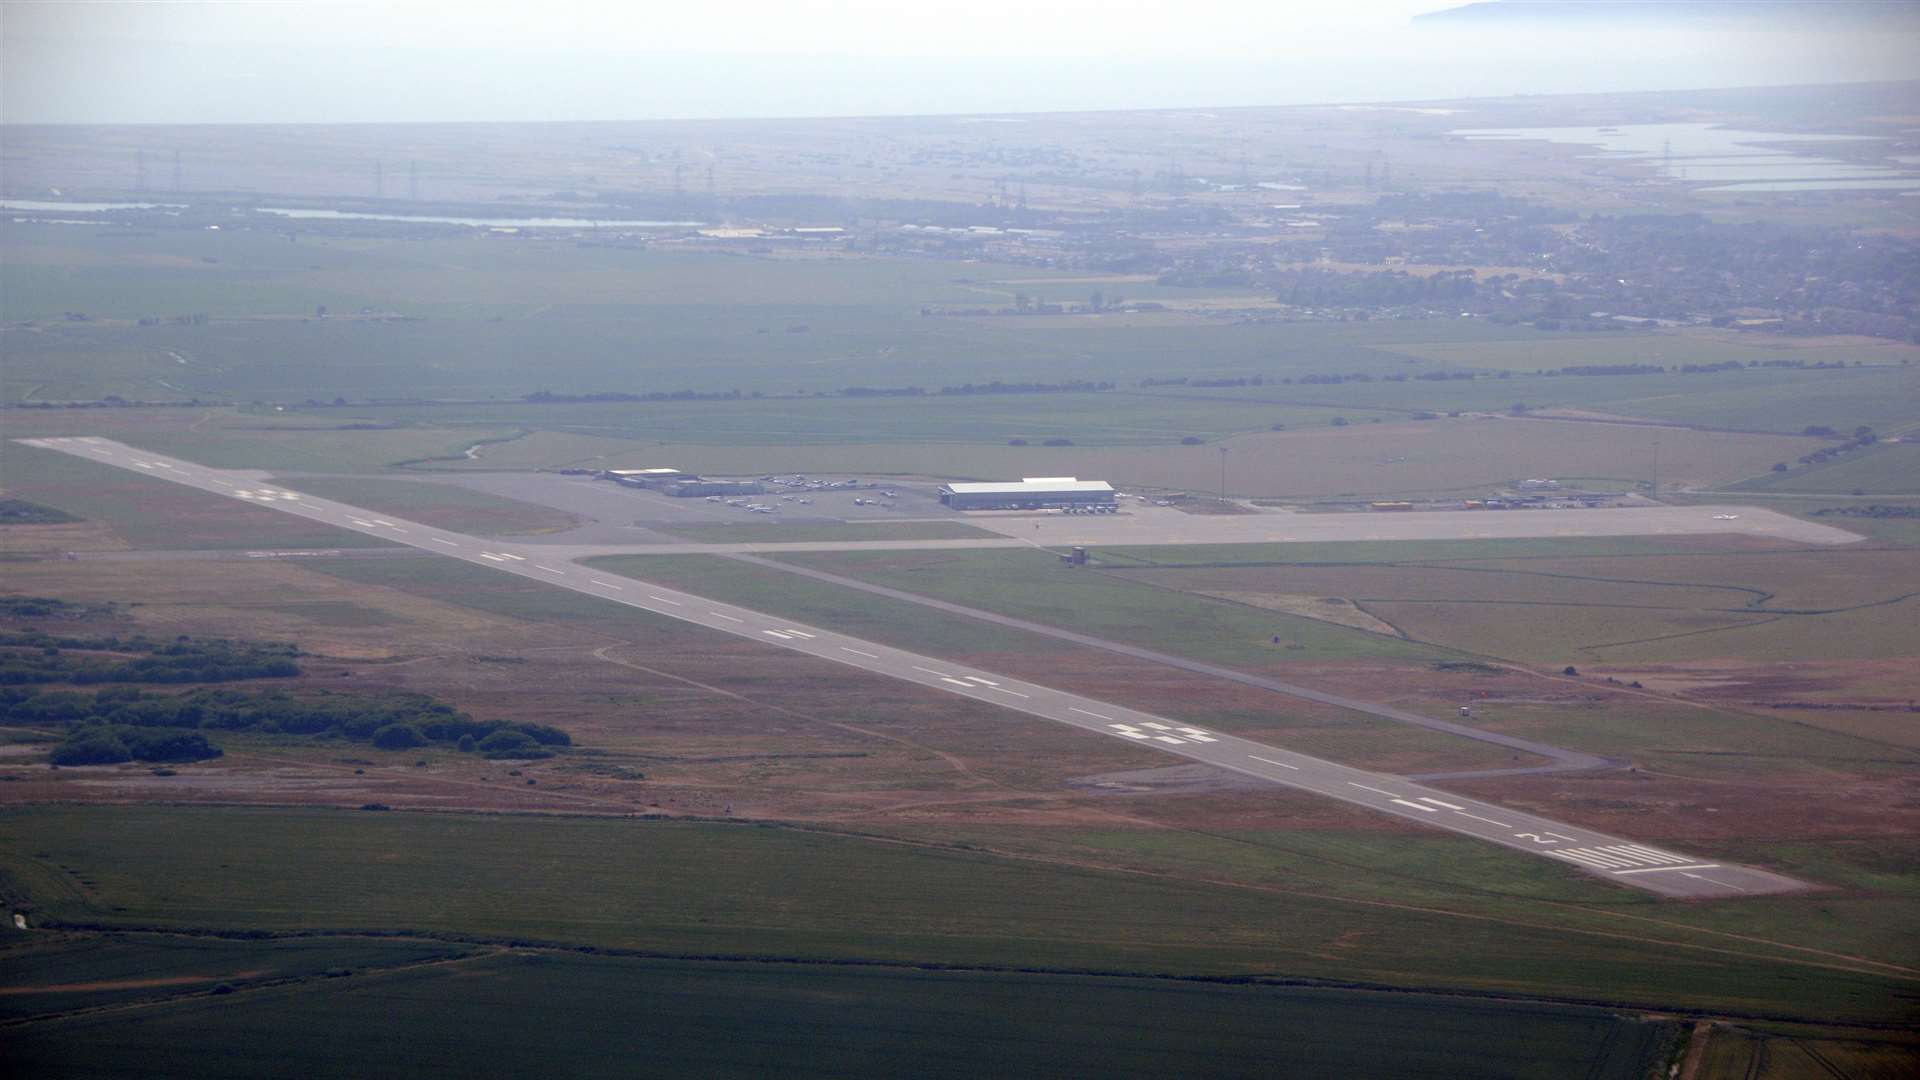 Lydd airport will have its runway extended by 294m and build a new terminal following a lengthy legal battle